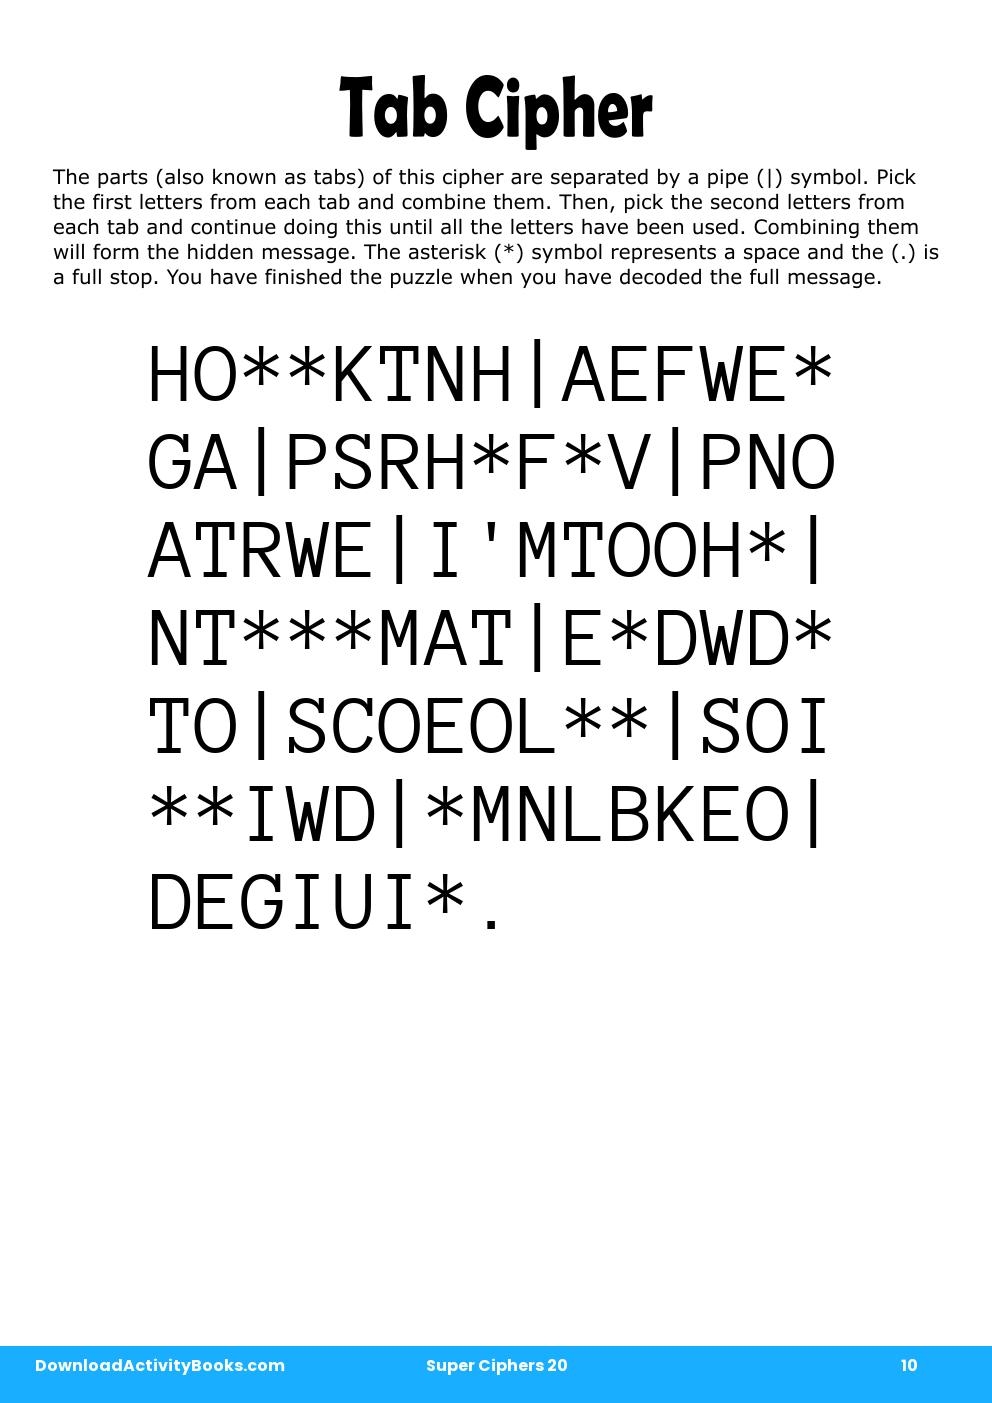 Tab Cipher in Super Ciphers 20